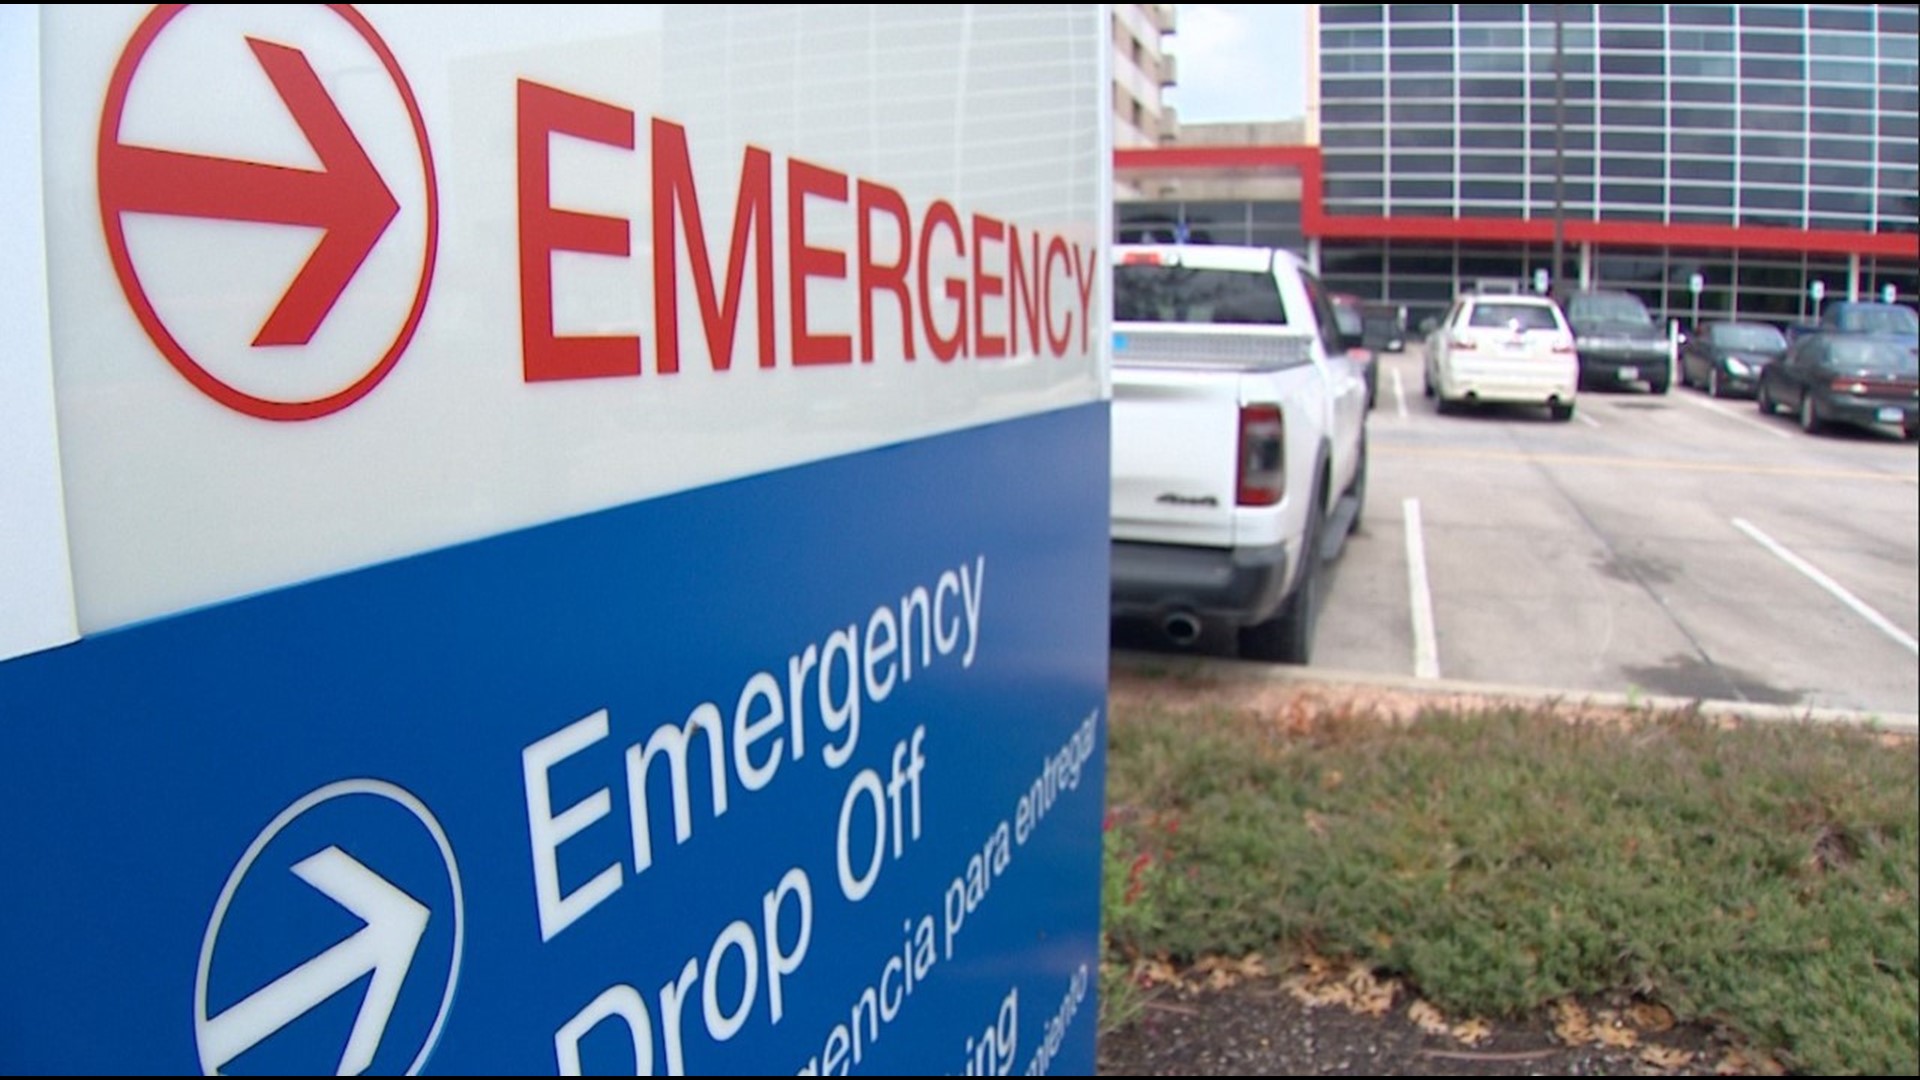 Dallas County and Tarrant County expressed concern about the number of hospital beds if the public doesn't shelter-in-place.